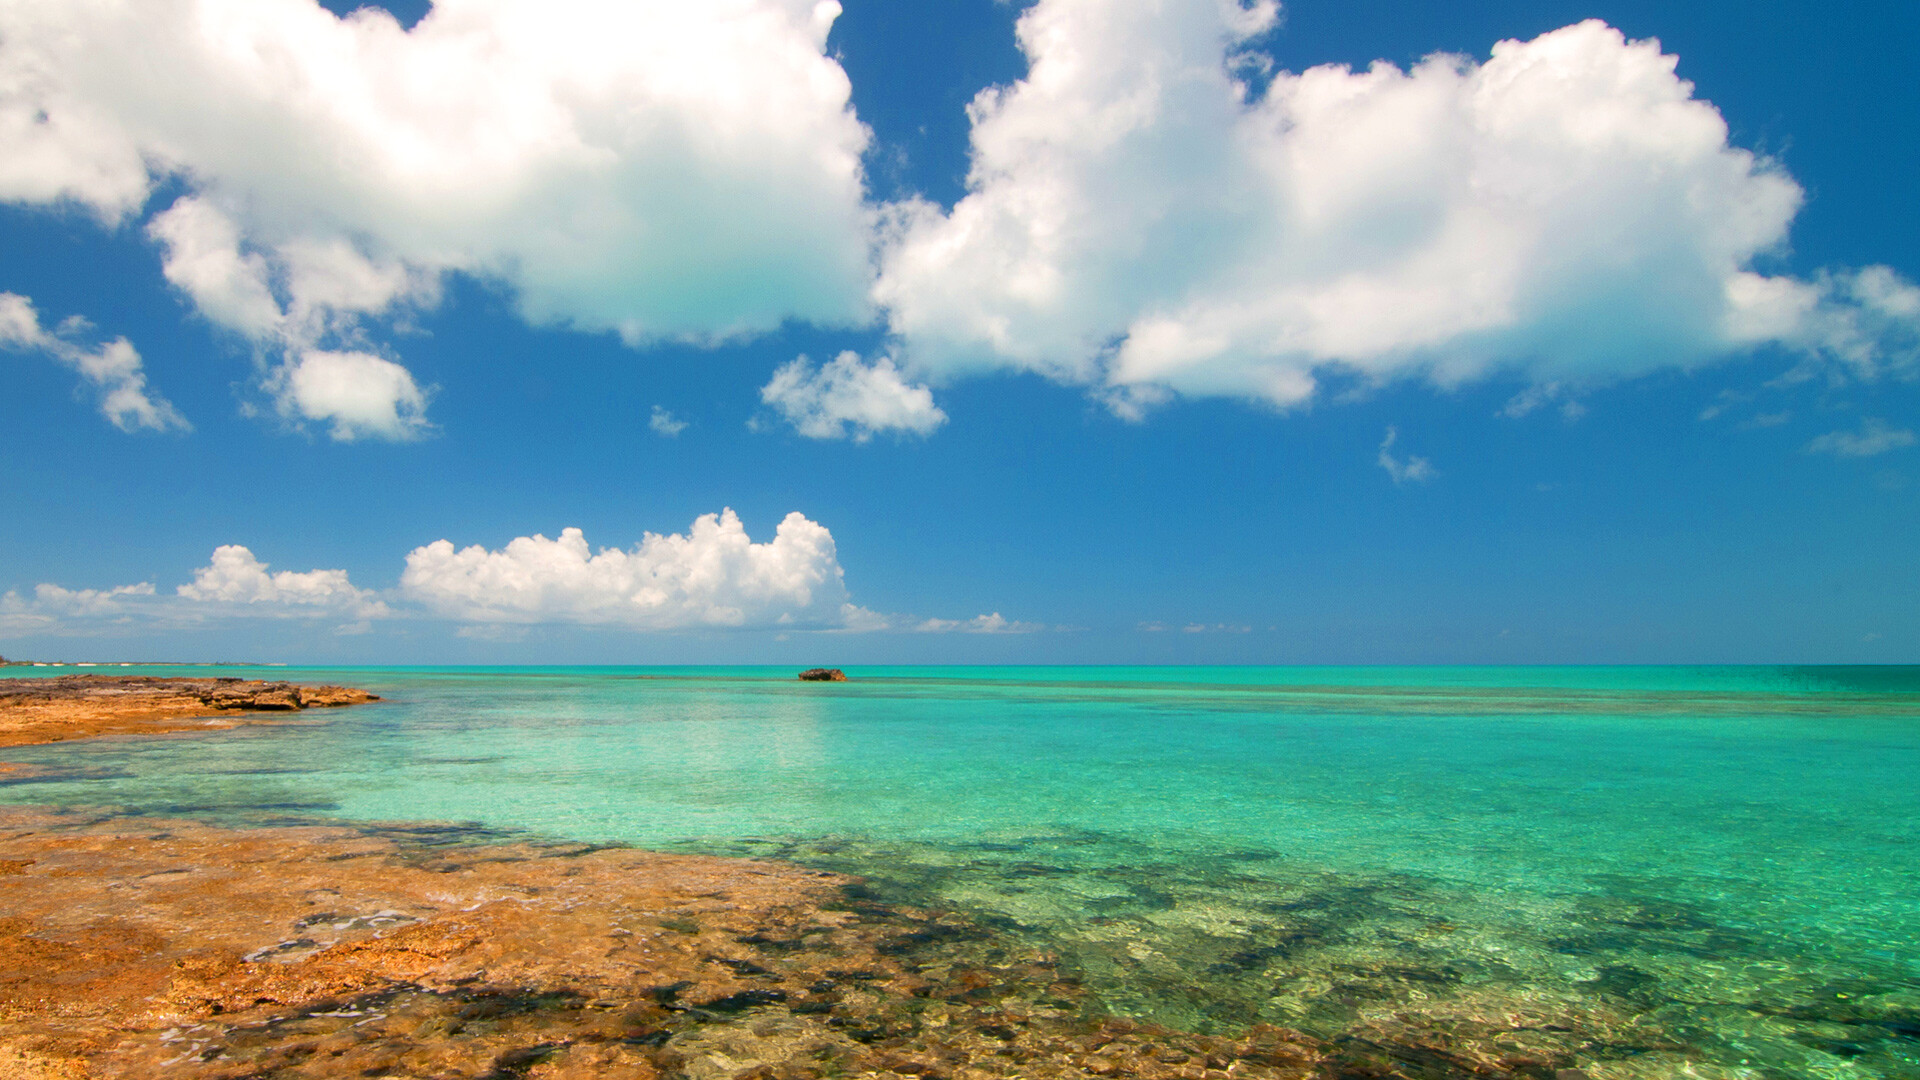 The Bahamas: The archipelagic state, Turquoise waters. 1920x1080 Full HD Wallpaper.